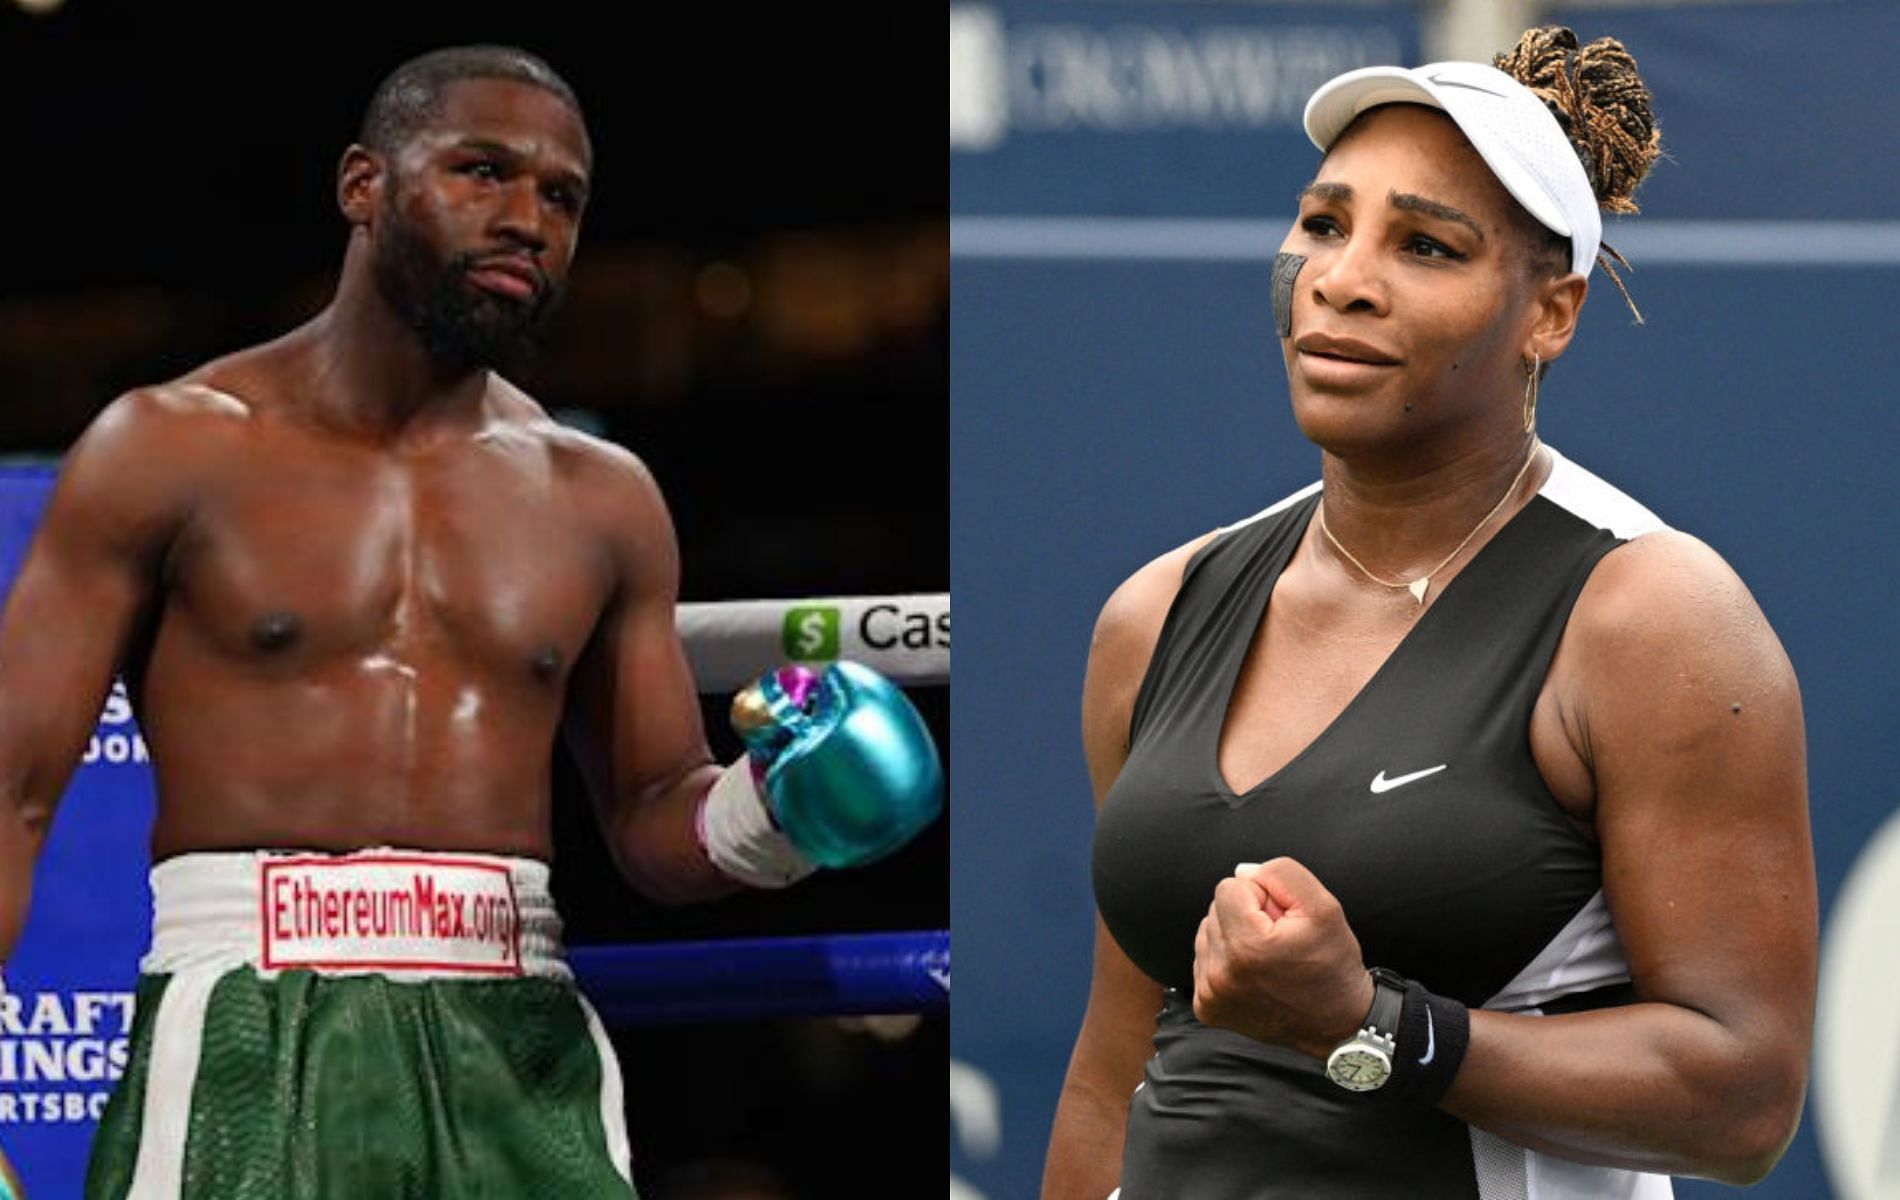 Floyd Mayweather (left) and Serena Williams (right)